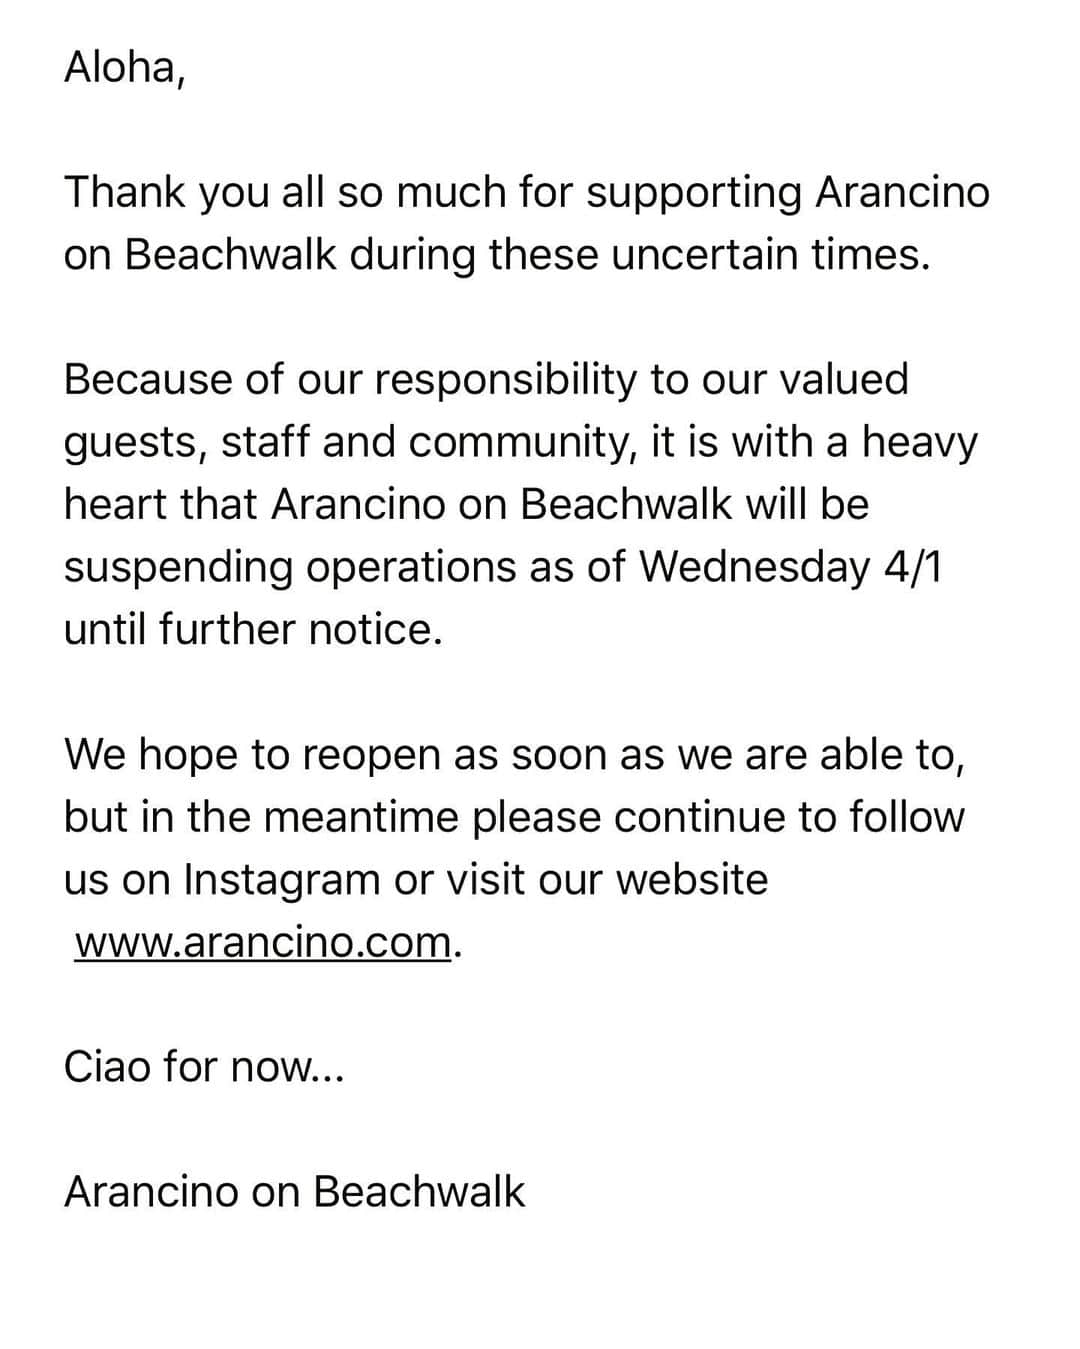 Arancino On Beachwalkのインスタグラム：「Because of our responsibility to our valued guests, staff and community, with a heavy heart, Arancino on Beachwalk will be suspending operations as of Monday 4/1 until further notice.  We hope to reopen as soon as we are able to, but in the meantime please continue to follow us on Instagram or visit our website  www.arancino.com.  Ciao for now... Arancino on Beachwalk」